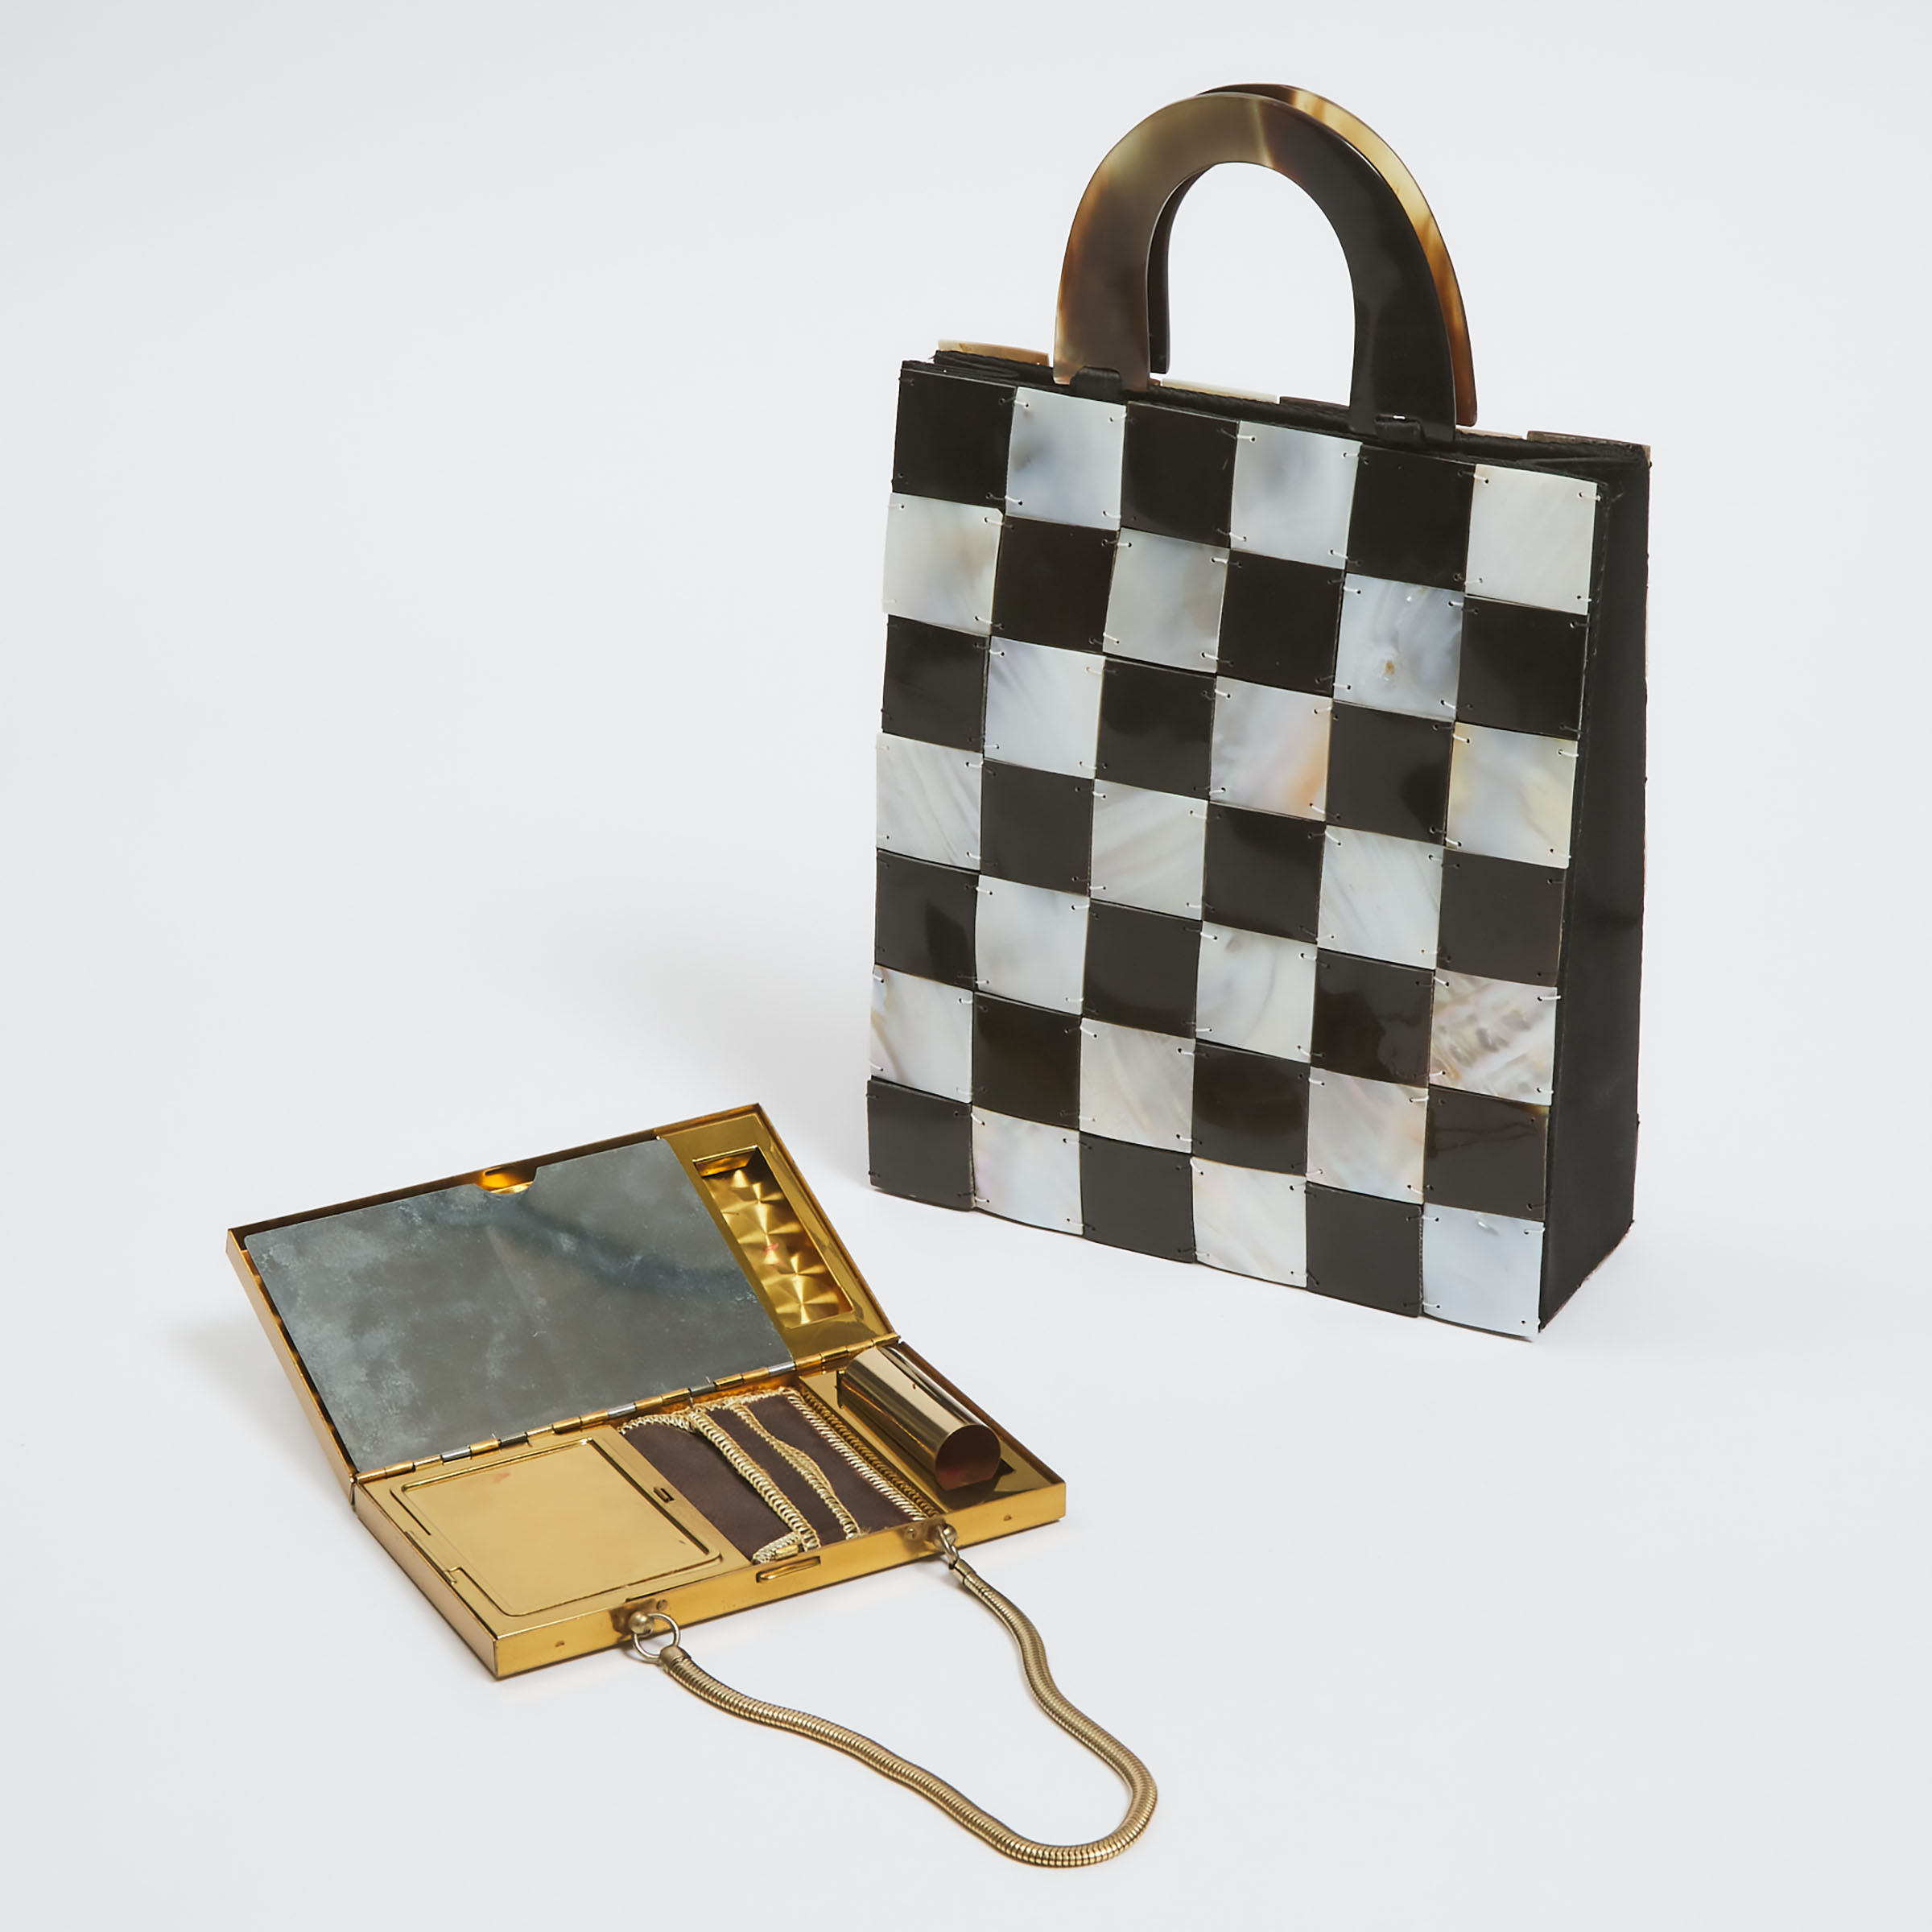 Handbag and Makeup Purse with Mother-of-Pearl Decoration, 1960s/70s